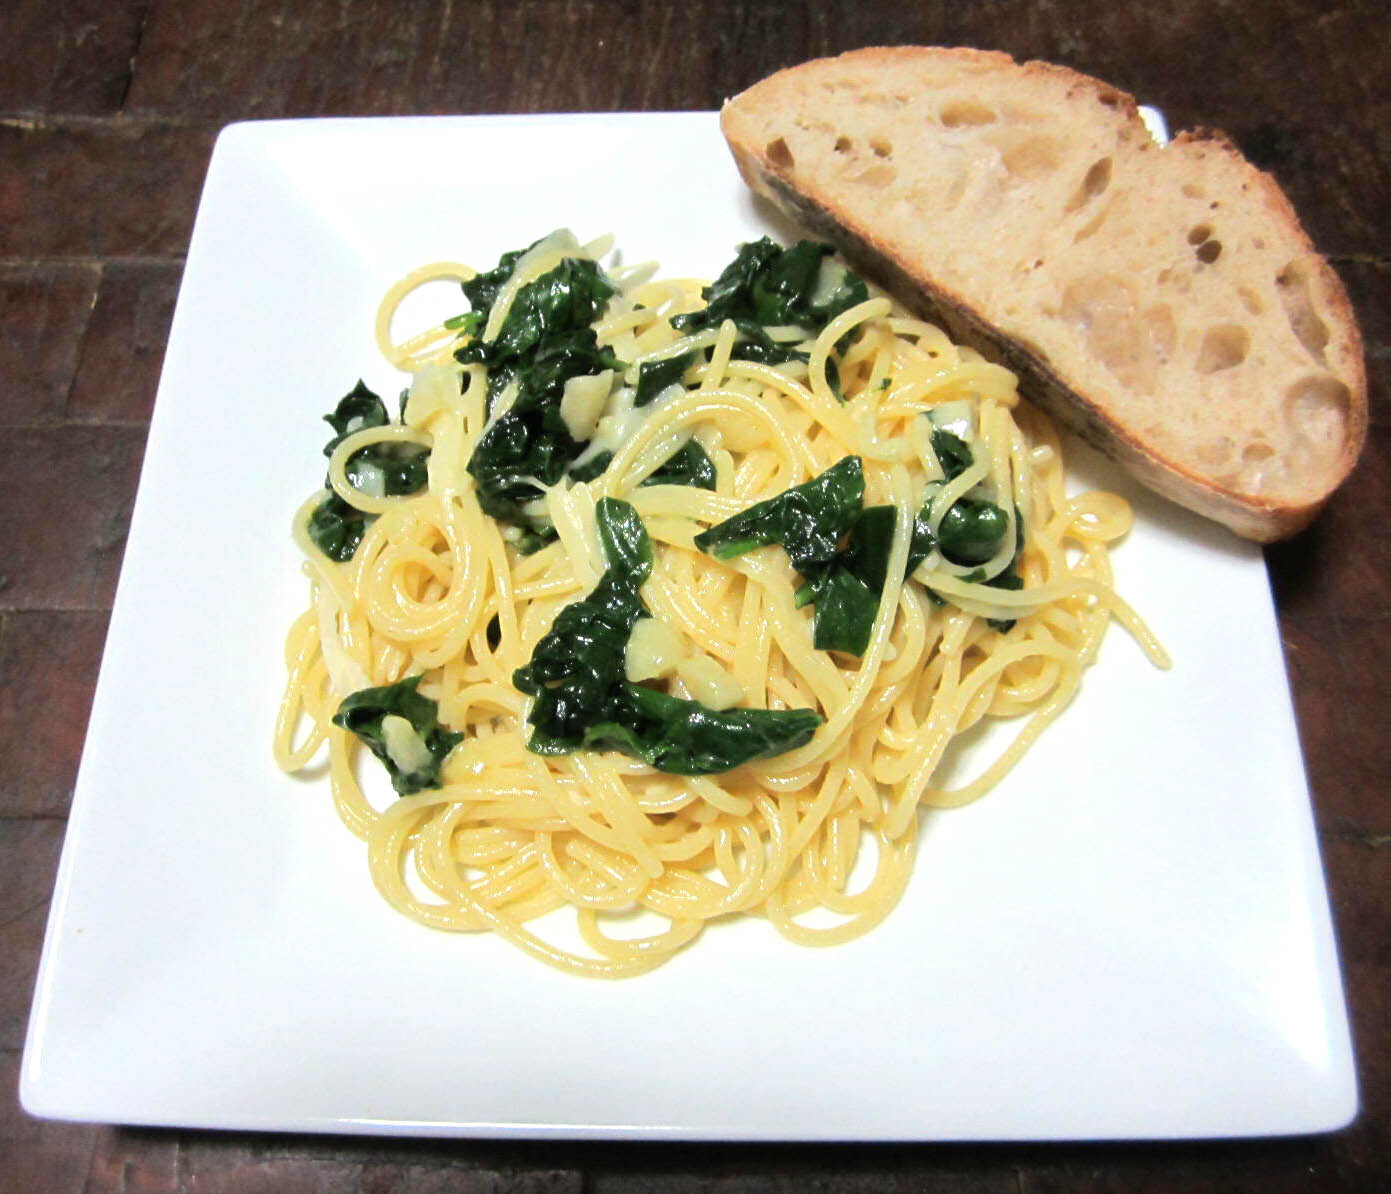 Spaghetti topped with spinach and cheese with a slice of bread on the side